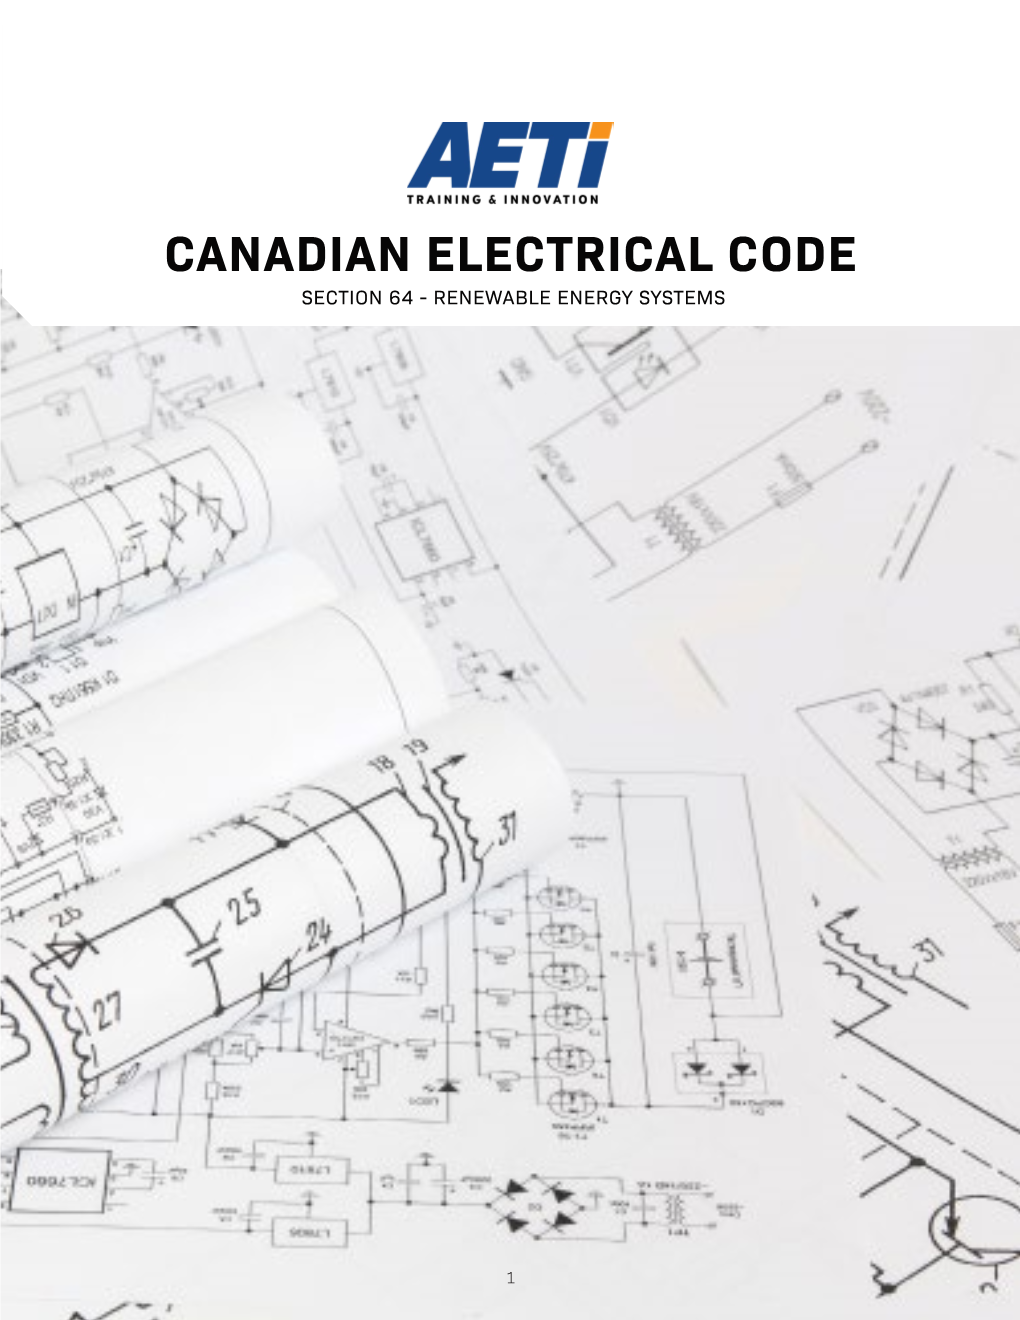 Canadian Electrical Code Section 64 - Renewable Energy Systems